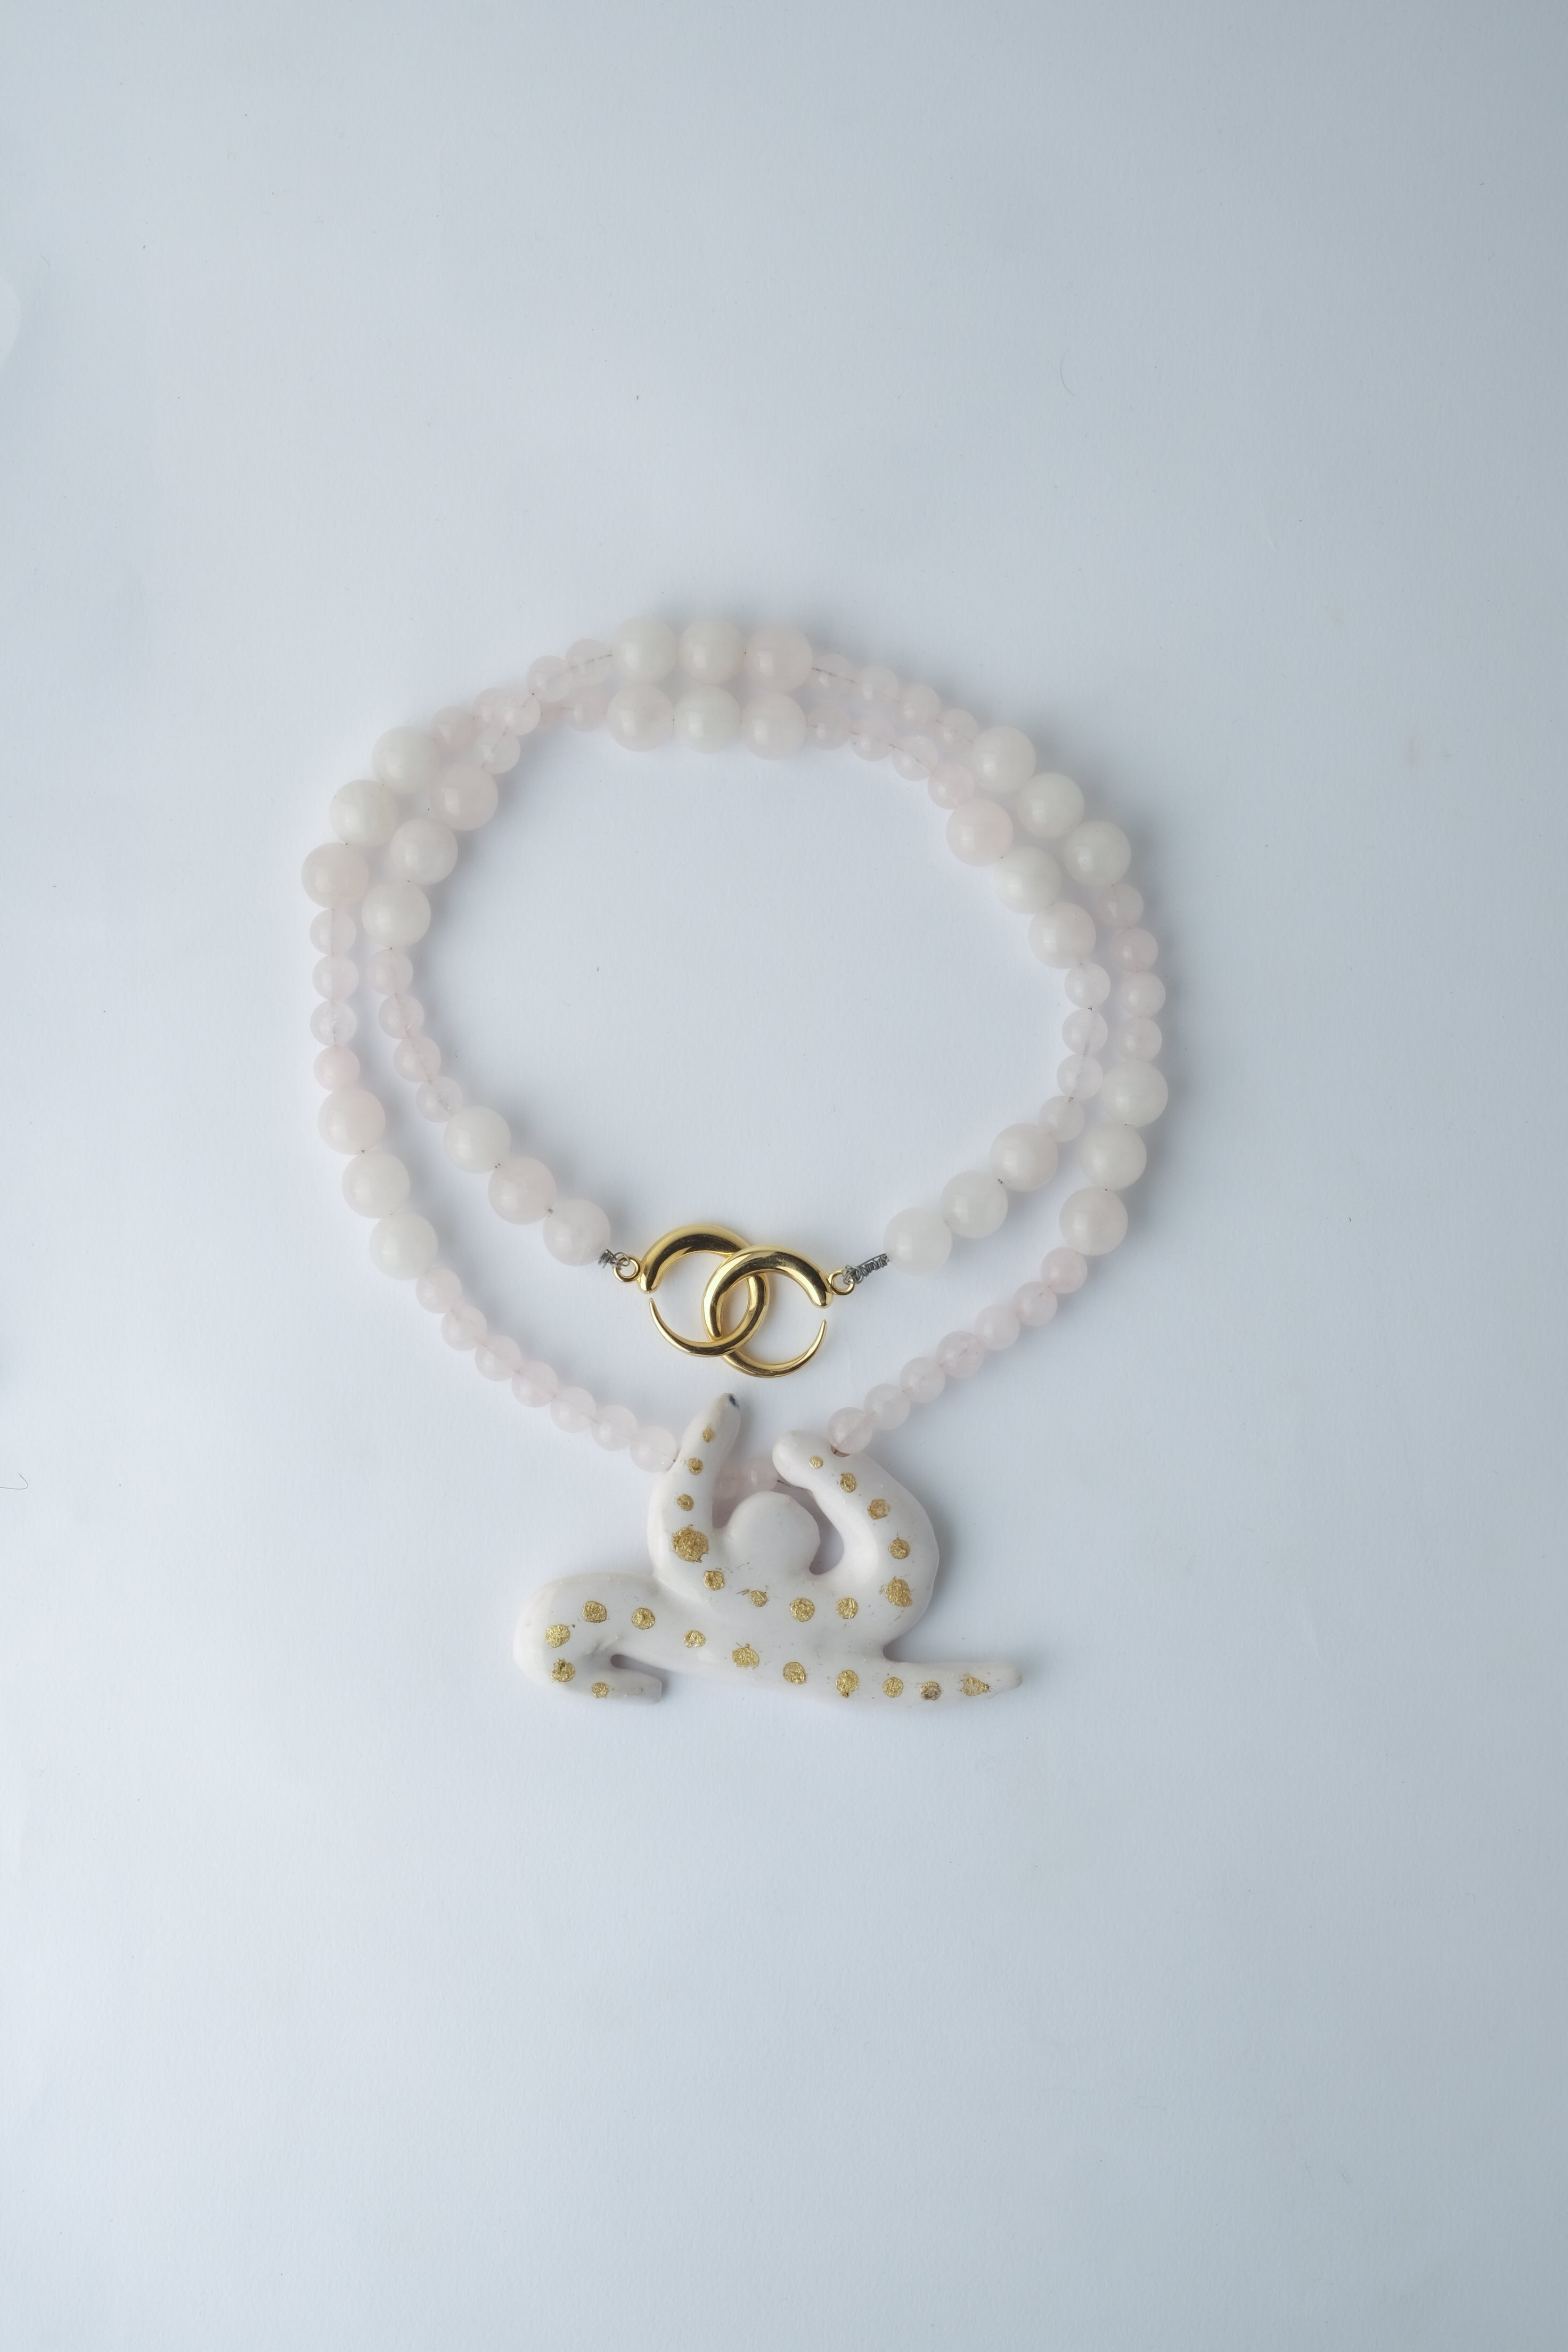 1/1 – Porcelain and Gold Leaf Leaping Forward Pendant on Quartz Beaded Cord